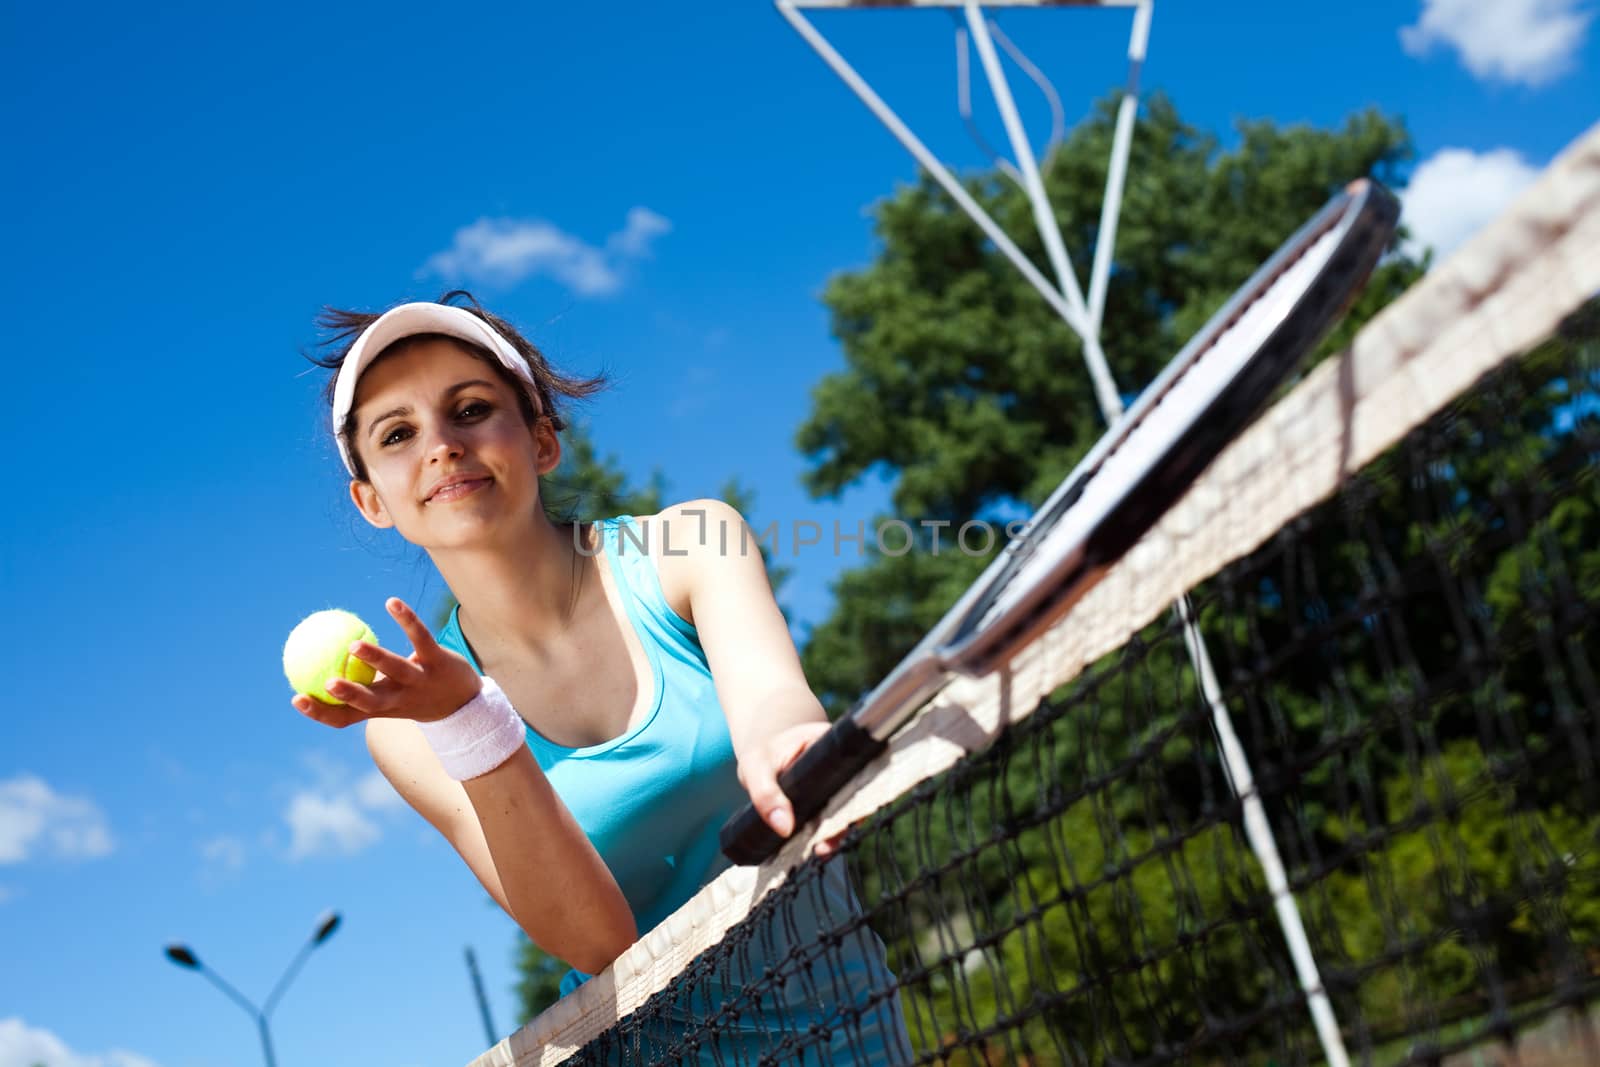 Woman playing tennis, summertime saturated theme by JanPietruszka